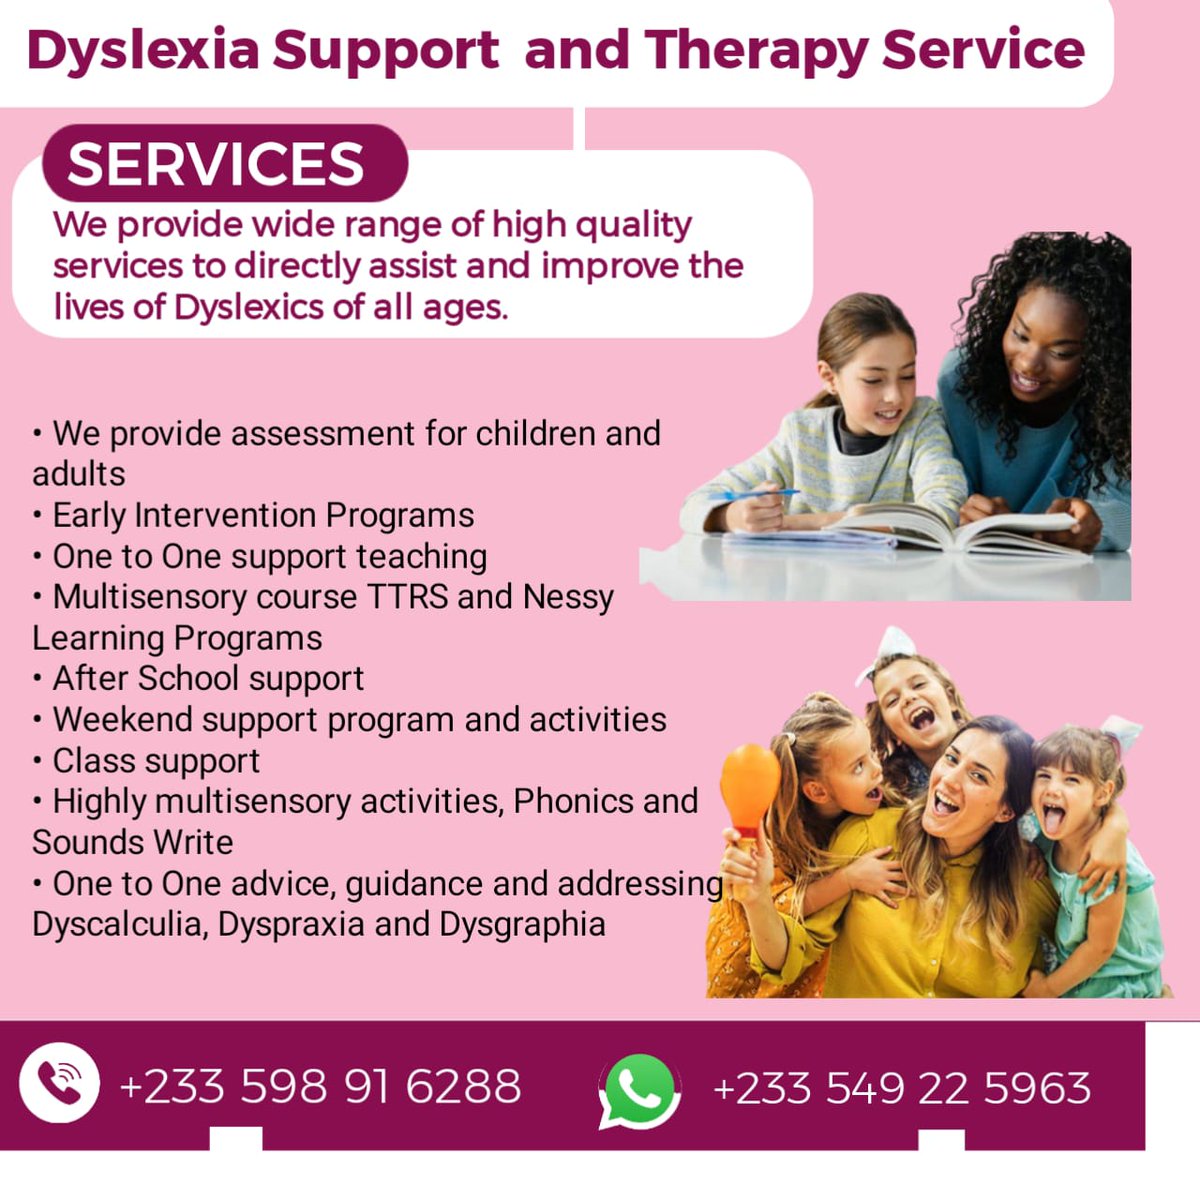 Are you looking for a #dyslexia support service in #Ghana, #Africa?

If so, you should really check this out.

#dyslexiasupport #ttrs #nessy #ortongillingham #multisensory #phonics #dyscalculia #dysgraphia #dyspraxia